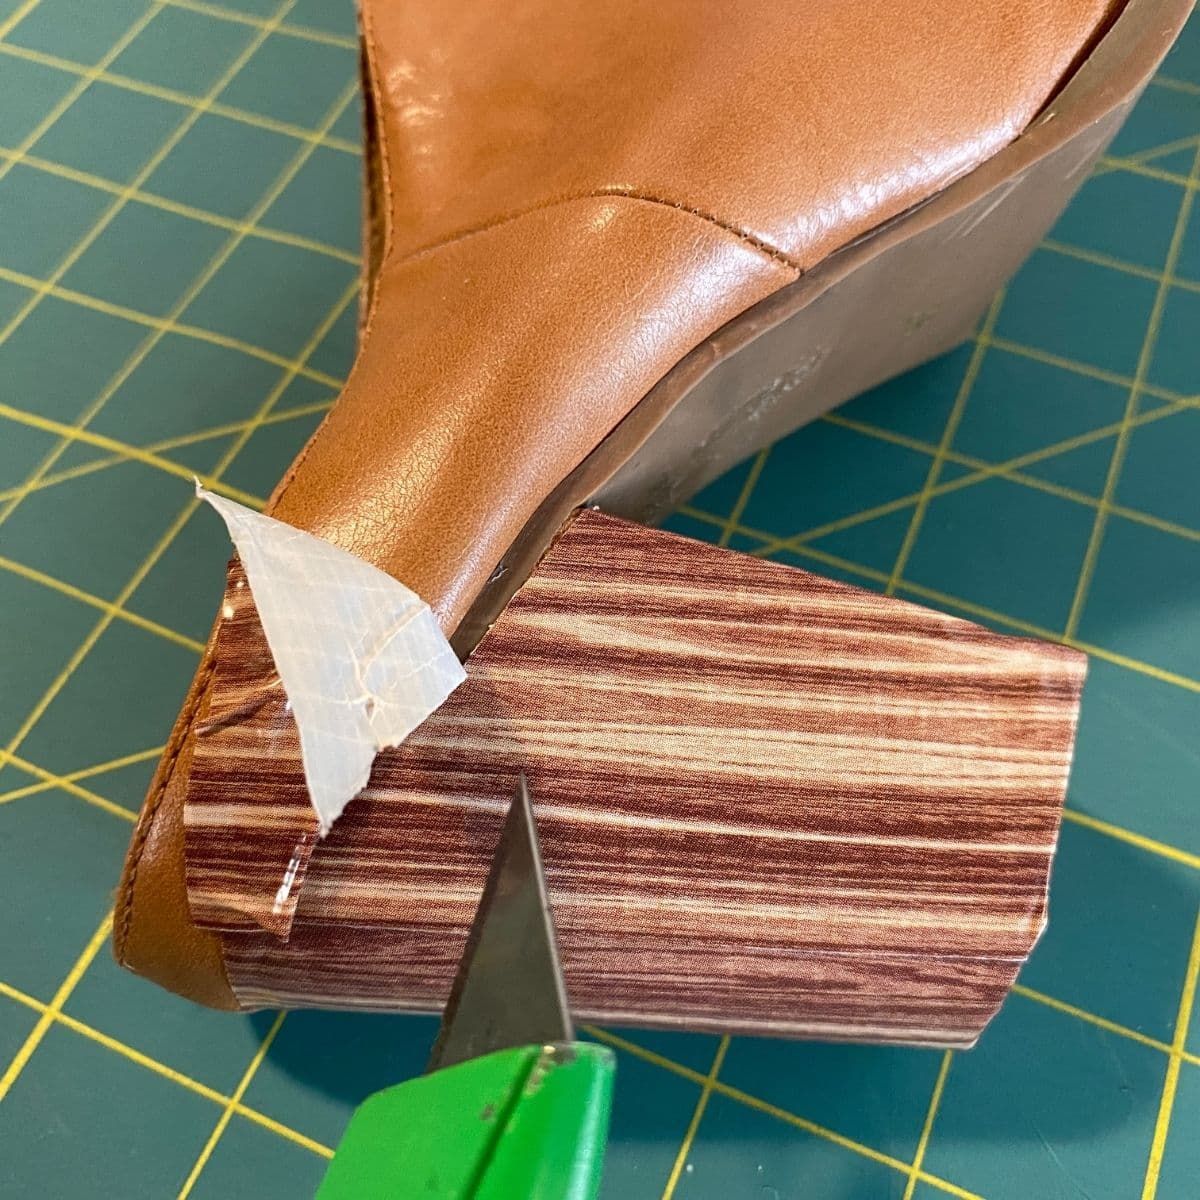 Repairing damaged shoes with wood tape, step 4